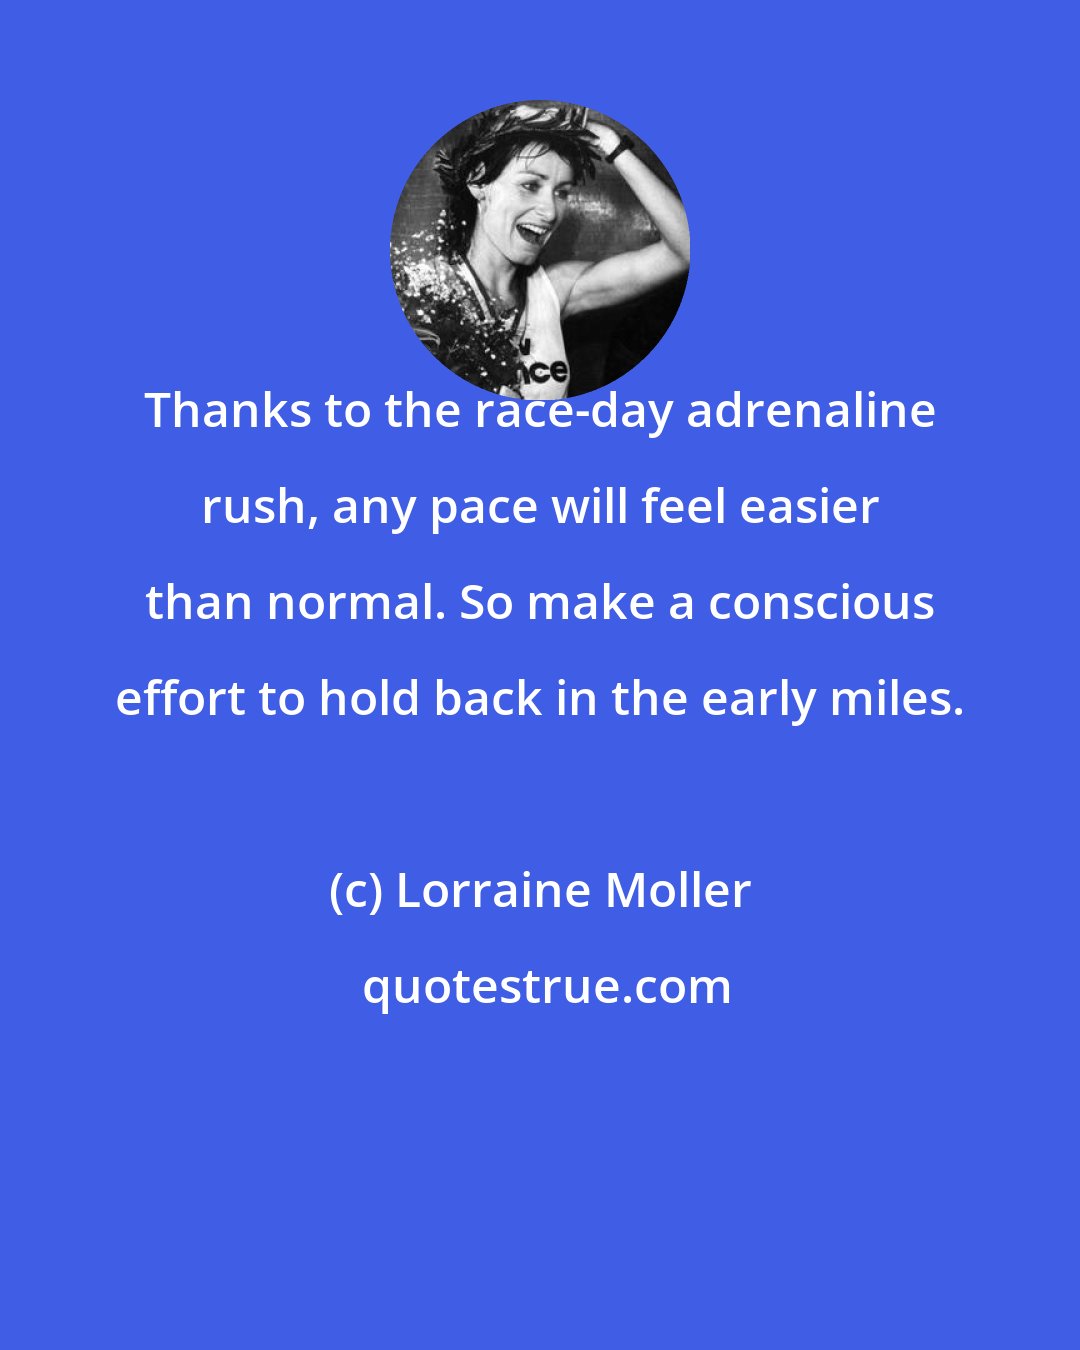 Lorraine Moller: Thanks to the race-day adrenaline rush, any pace will feel easier than normal. So make a conscious effort to hold back in the early miles.